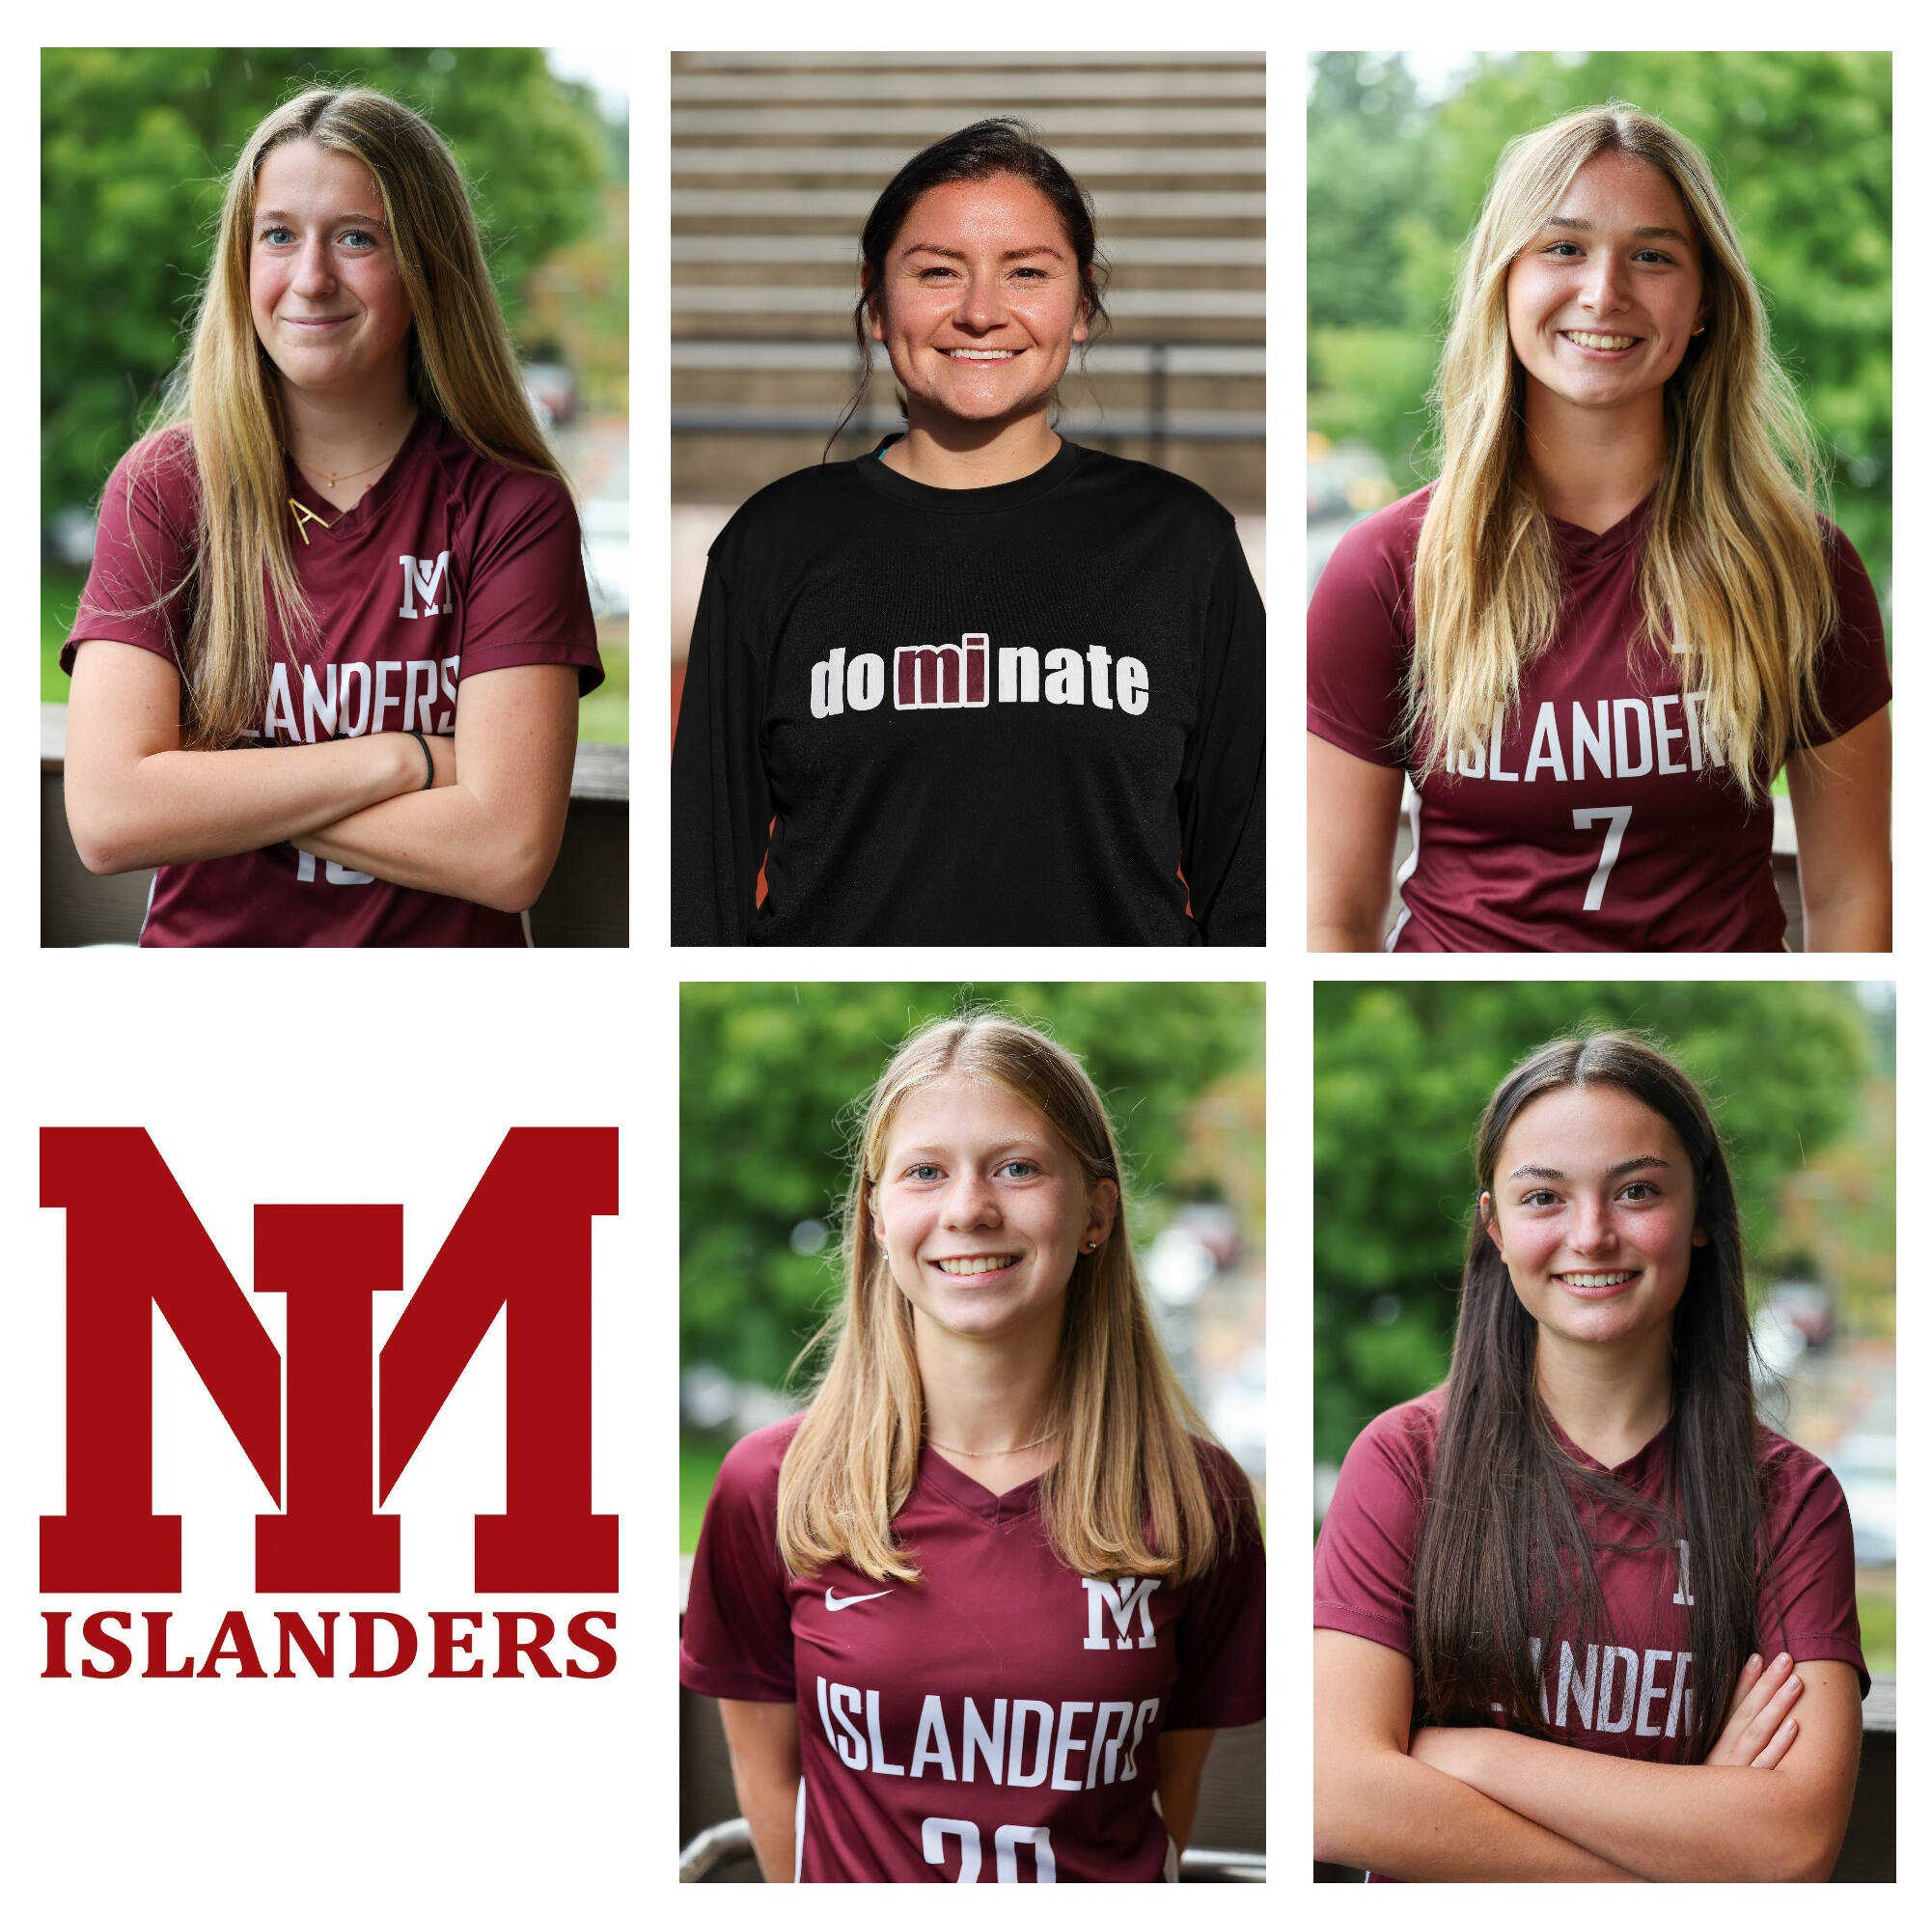 Mercer Island High School junior Anna Carson earned first-team 3A All-KingCo girls soccer honors and Erin Bourguignon was named one of the league’s coaches of the year. Senior Ella Martin and freshmen Jackie Gonzalez and Hayden Feimster are league honorable mentions. Clockwise from left, Carson, Bourguignon, Martin, Gonzalez and Feimster. Photos courtesy of the MIHS girls soccer team